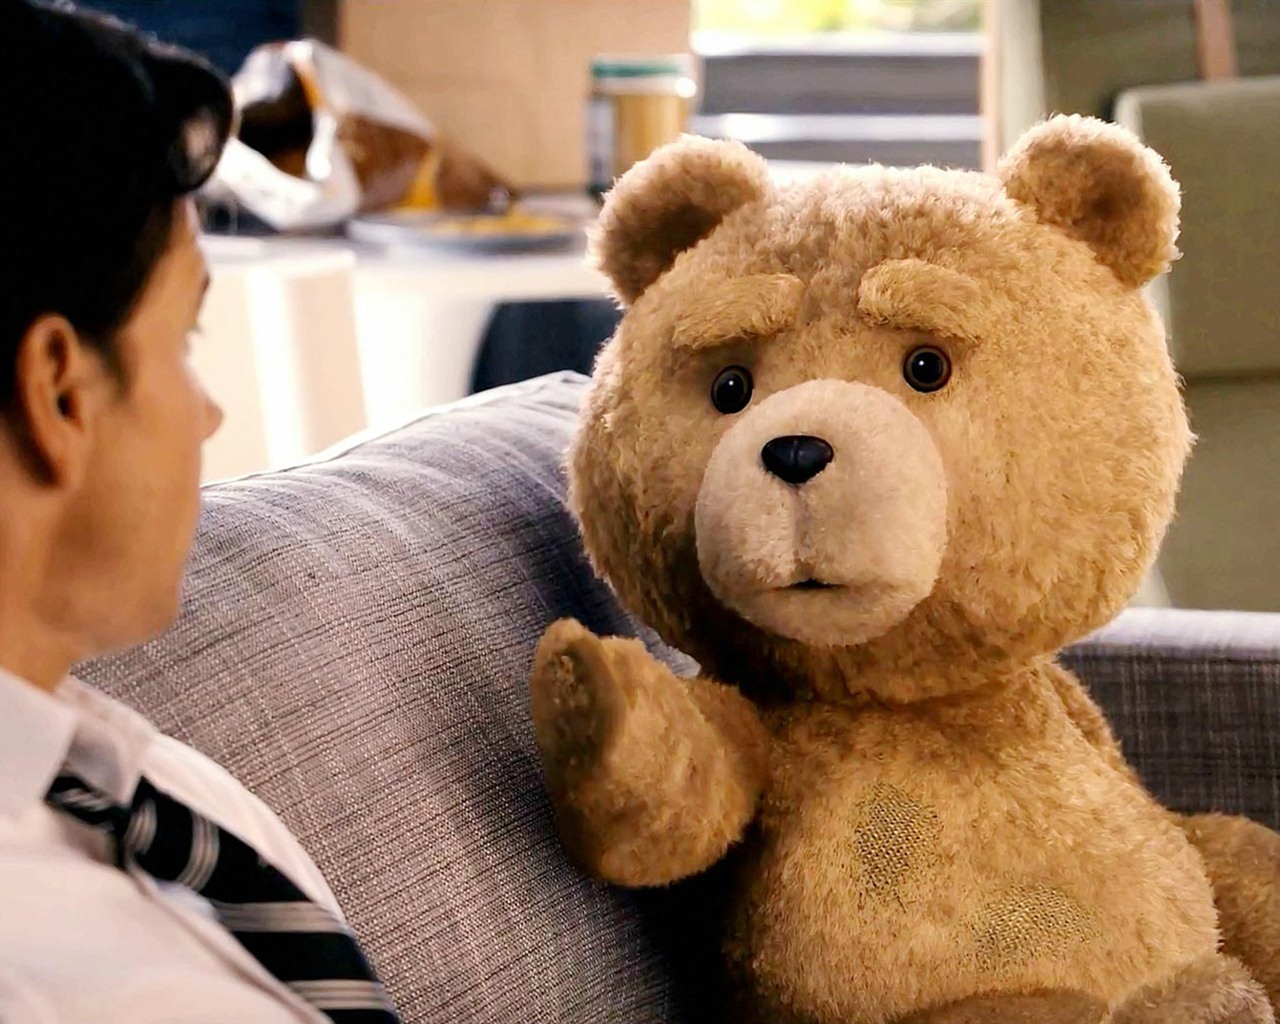 Ted 12 Hd Movie Wallpapers 8 1280x1024 Wallpaper Download Ted 12 Hd Movie Wallpapers Moive Wallpapers V3 Wallpaper Site